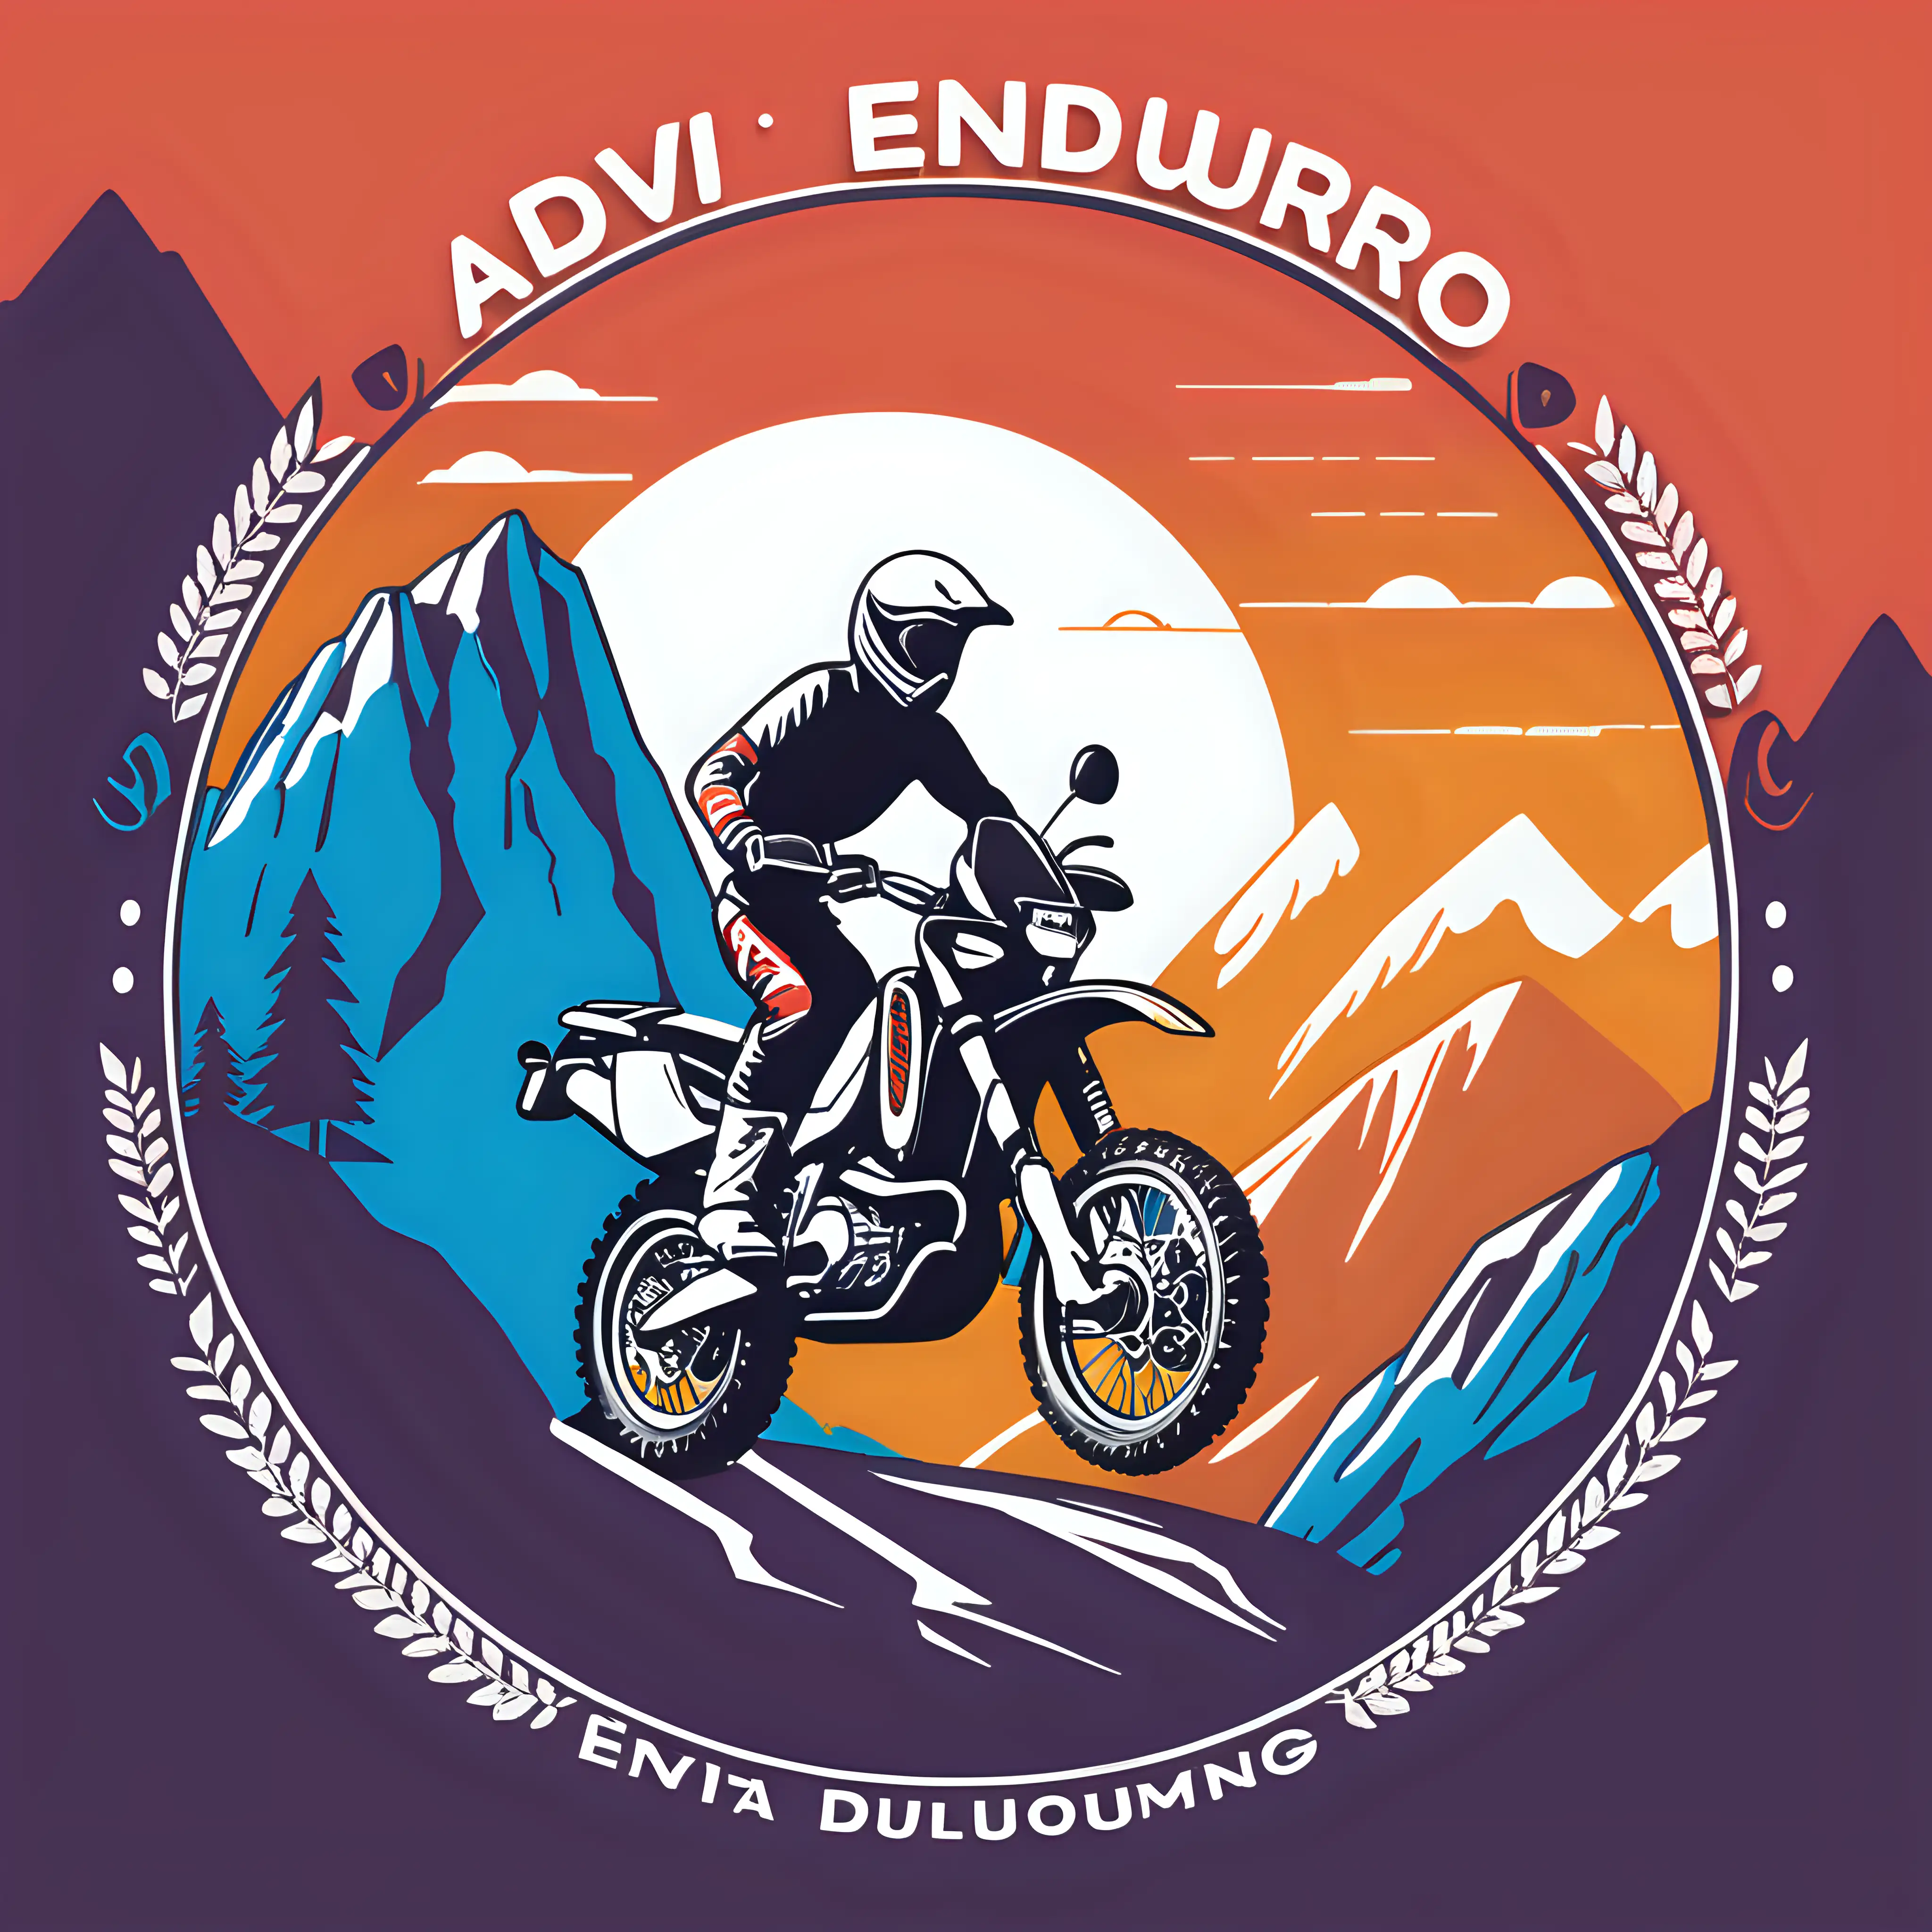 A vivid round logo with the word ADVENDURO in it, that shows a  motorbike and a rider climbing a mountain.